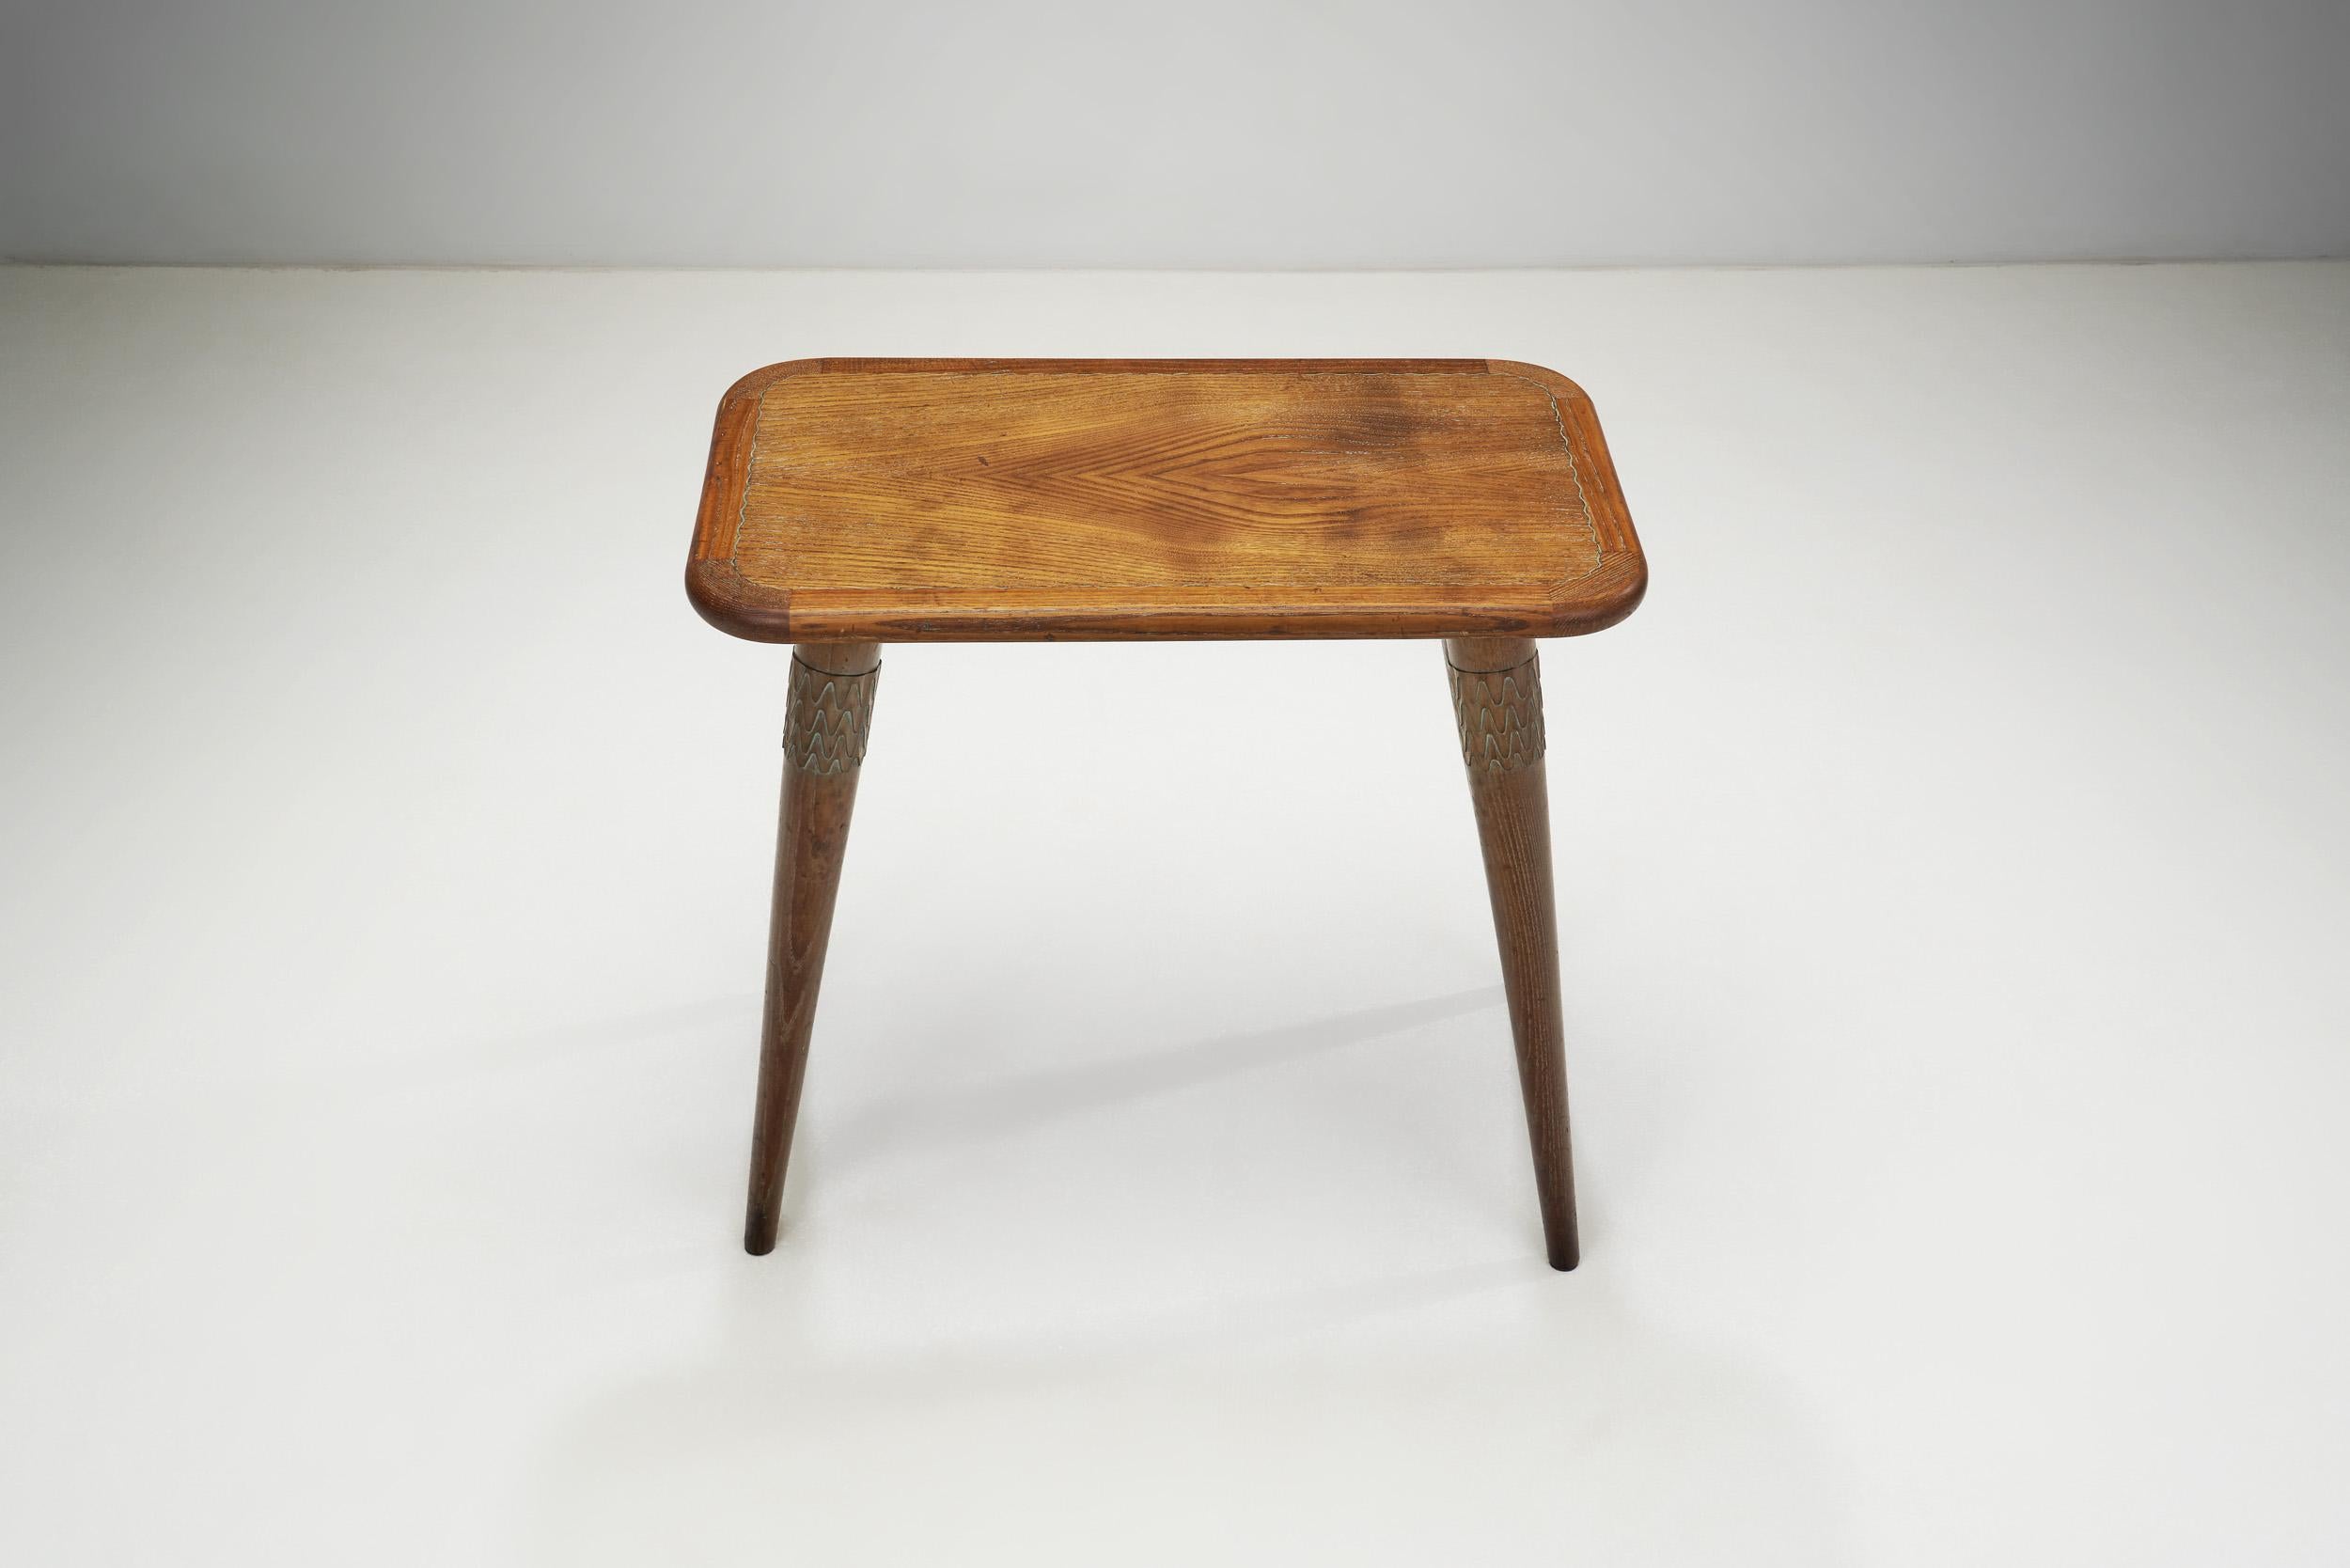 Mid-20th Century Artisan Wood Side Table with Decorative Carved Legs, Europe 1950s For Sale